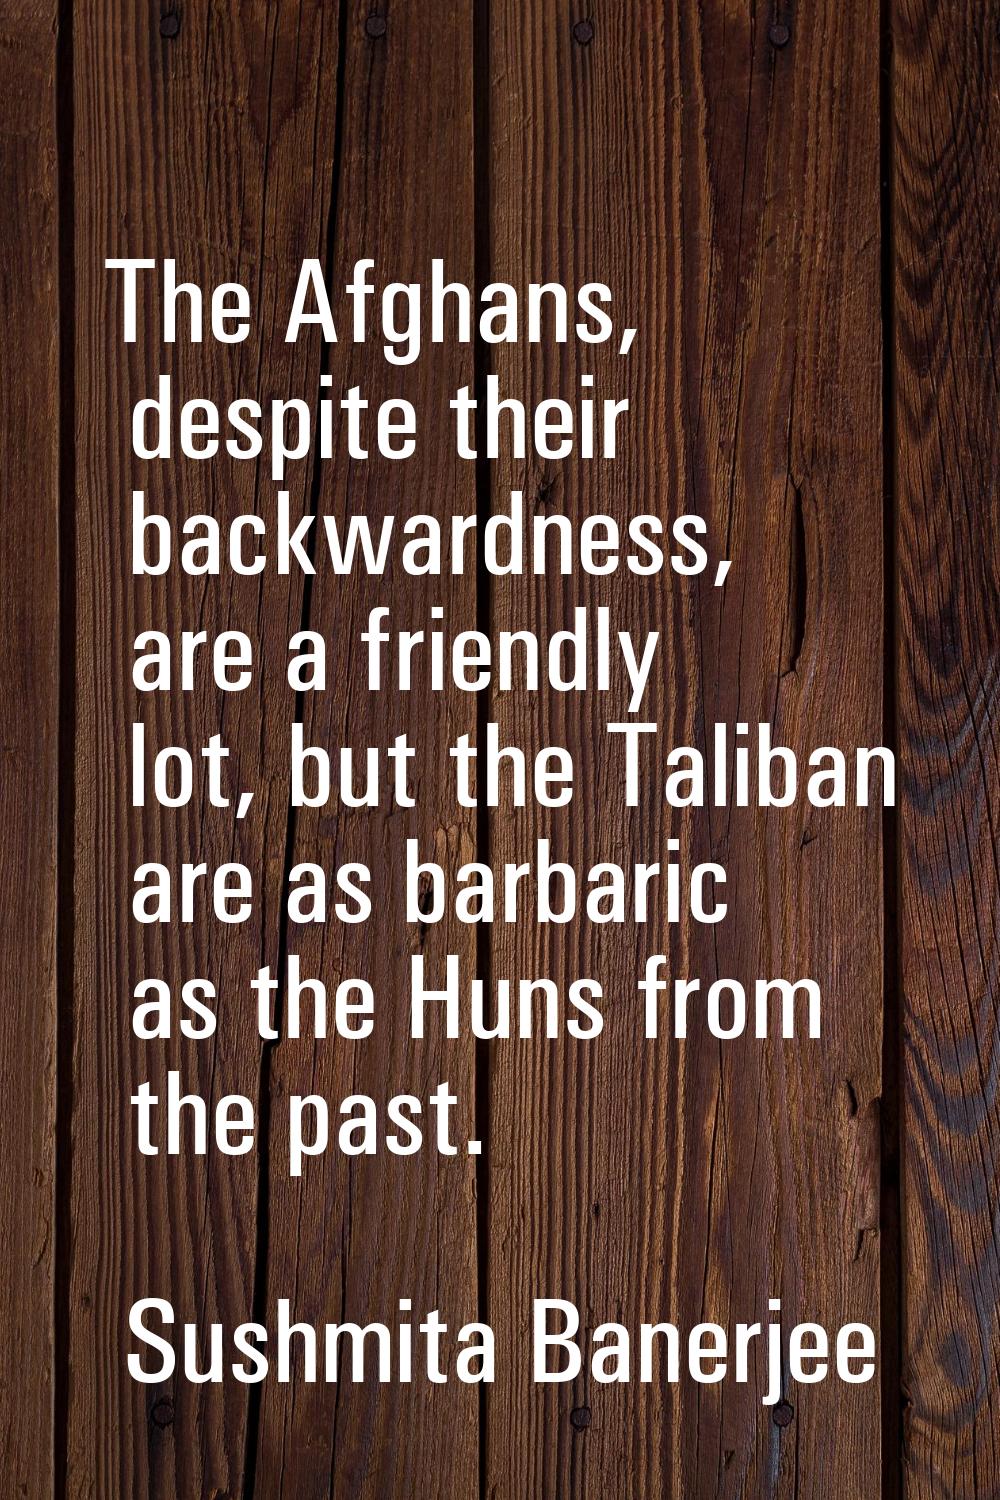 The Afghans, despite their backwardness, are a friendly lot, but the Taliban are as barbaric as the